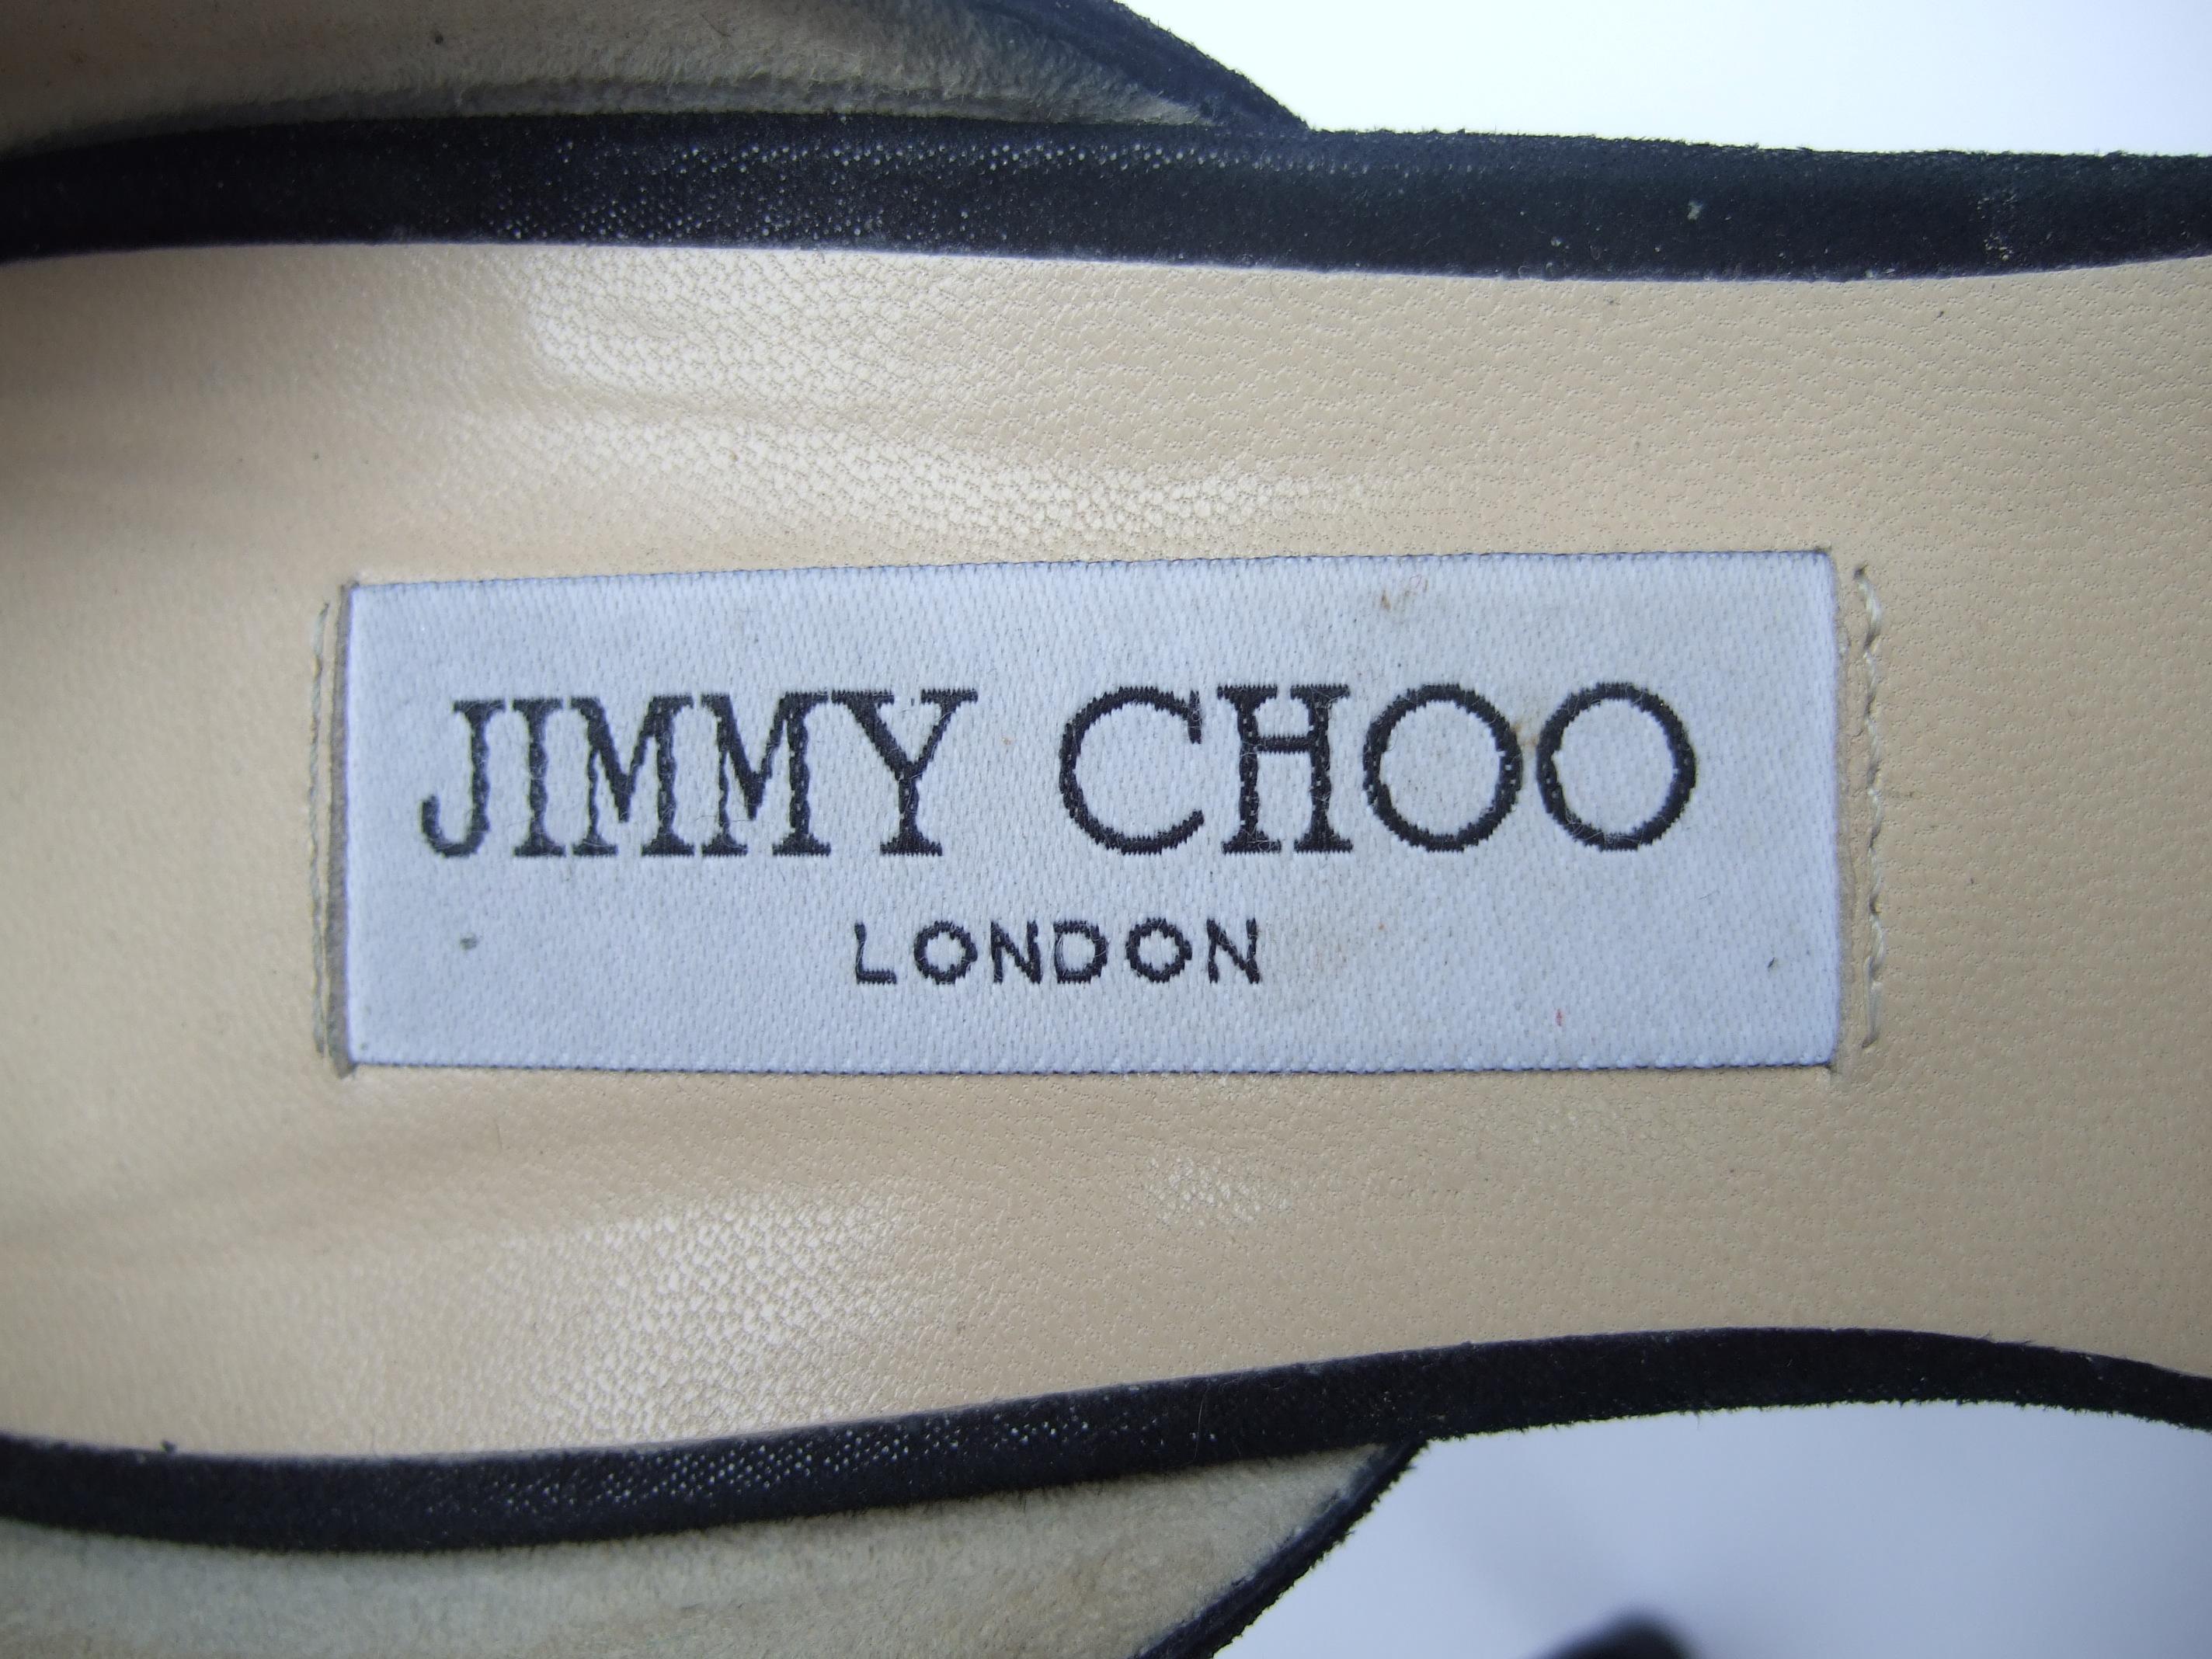 Jimmy Choo London Italian Black Brushed Leather Stiletto Pumps Size 40 c 1990s For Sale 1